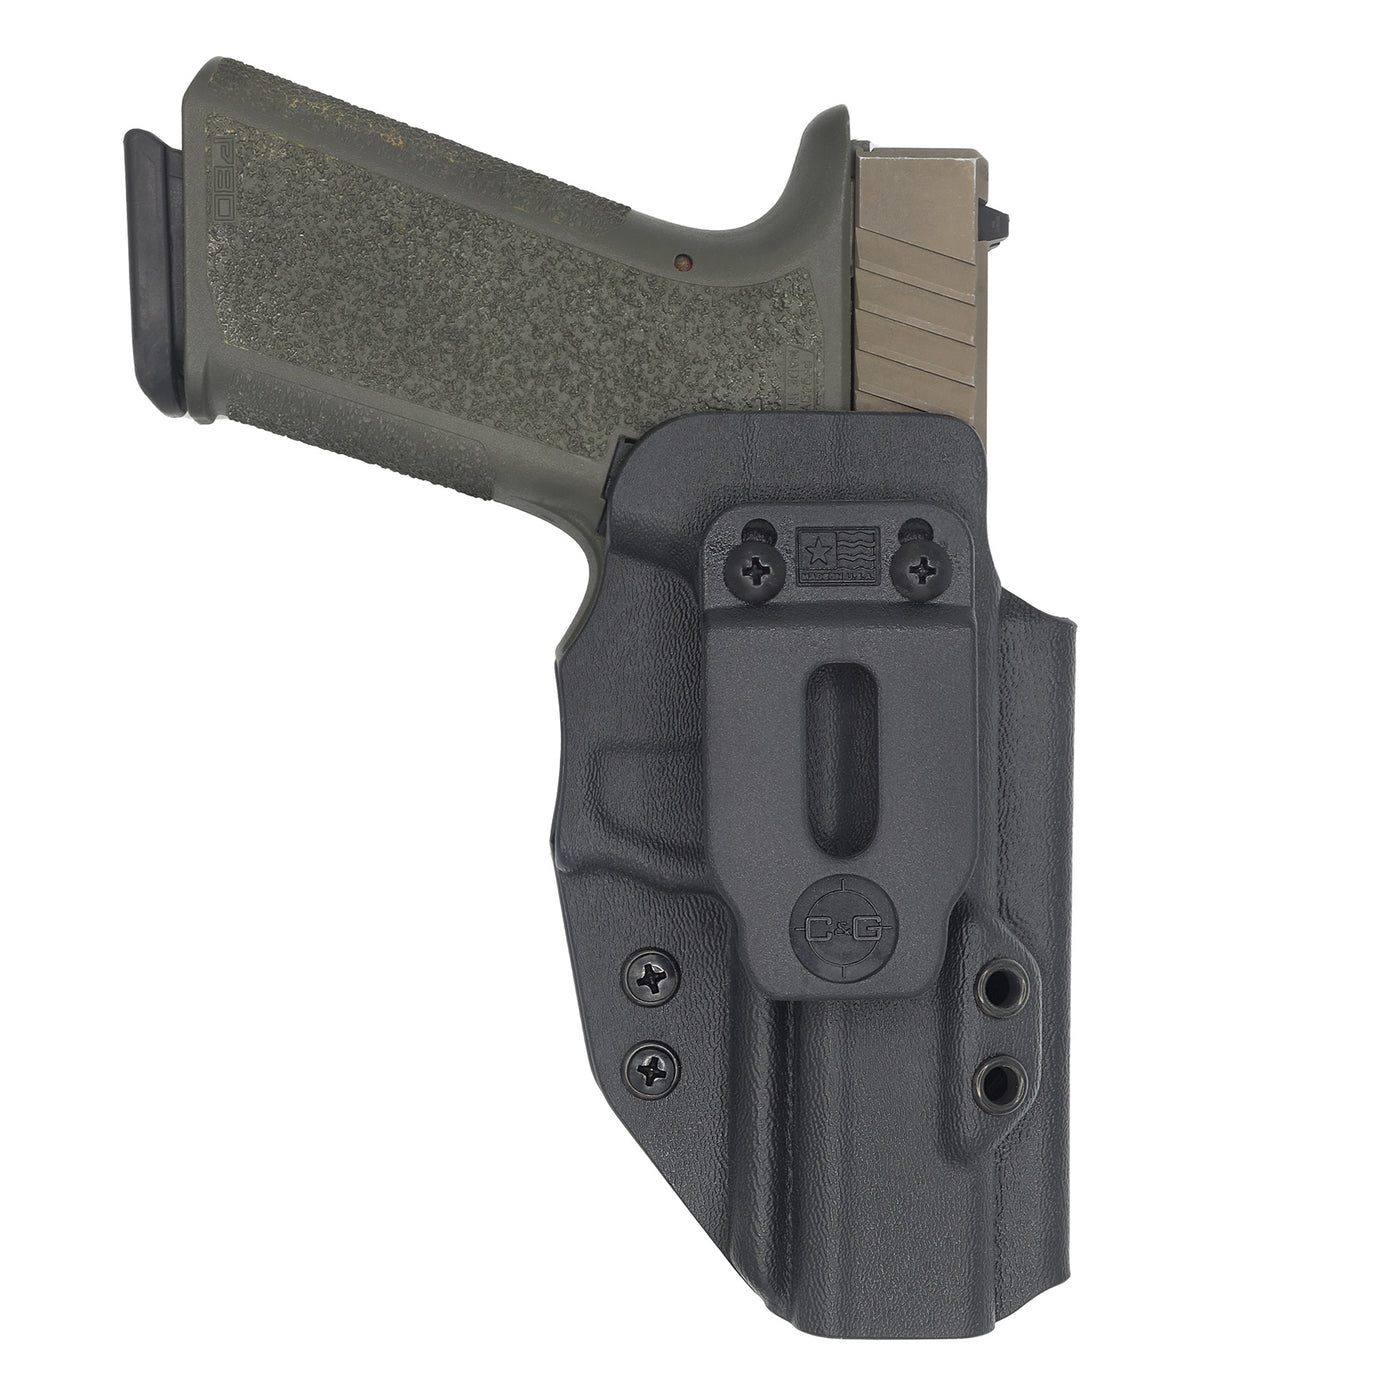 Shown is the quickship C&G Holsters inside the waistband holster for the Poly80 PF940c.